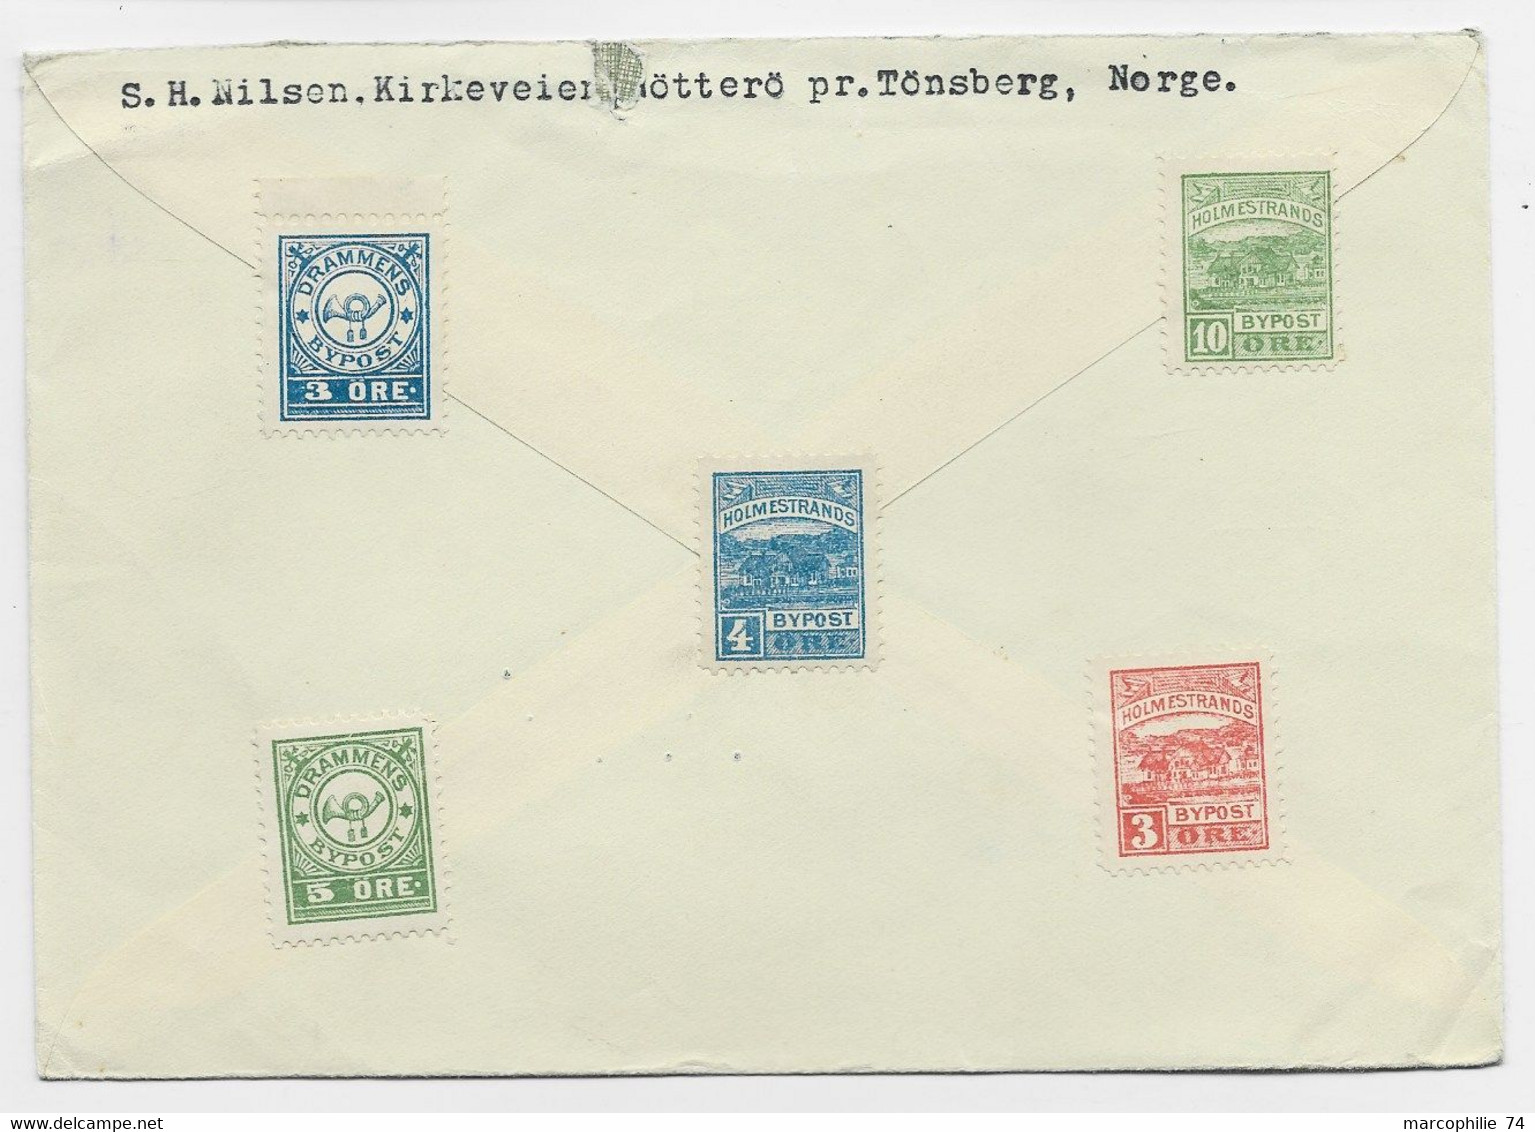 NORGE NORWAY LETTRE COVER TONSBERG 10.1.1955 TO USA - Lettres & Documents